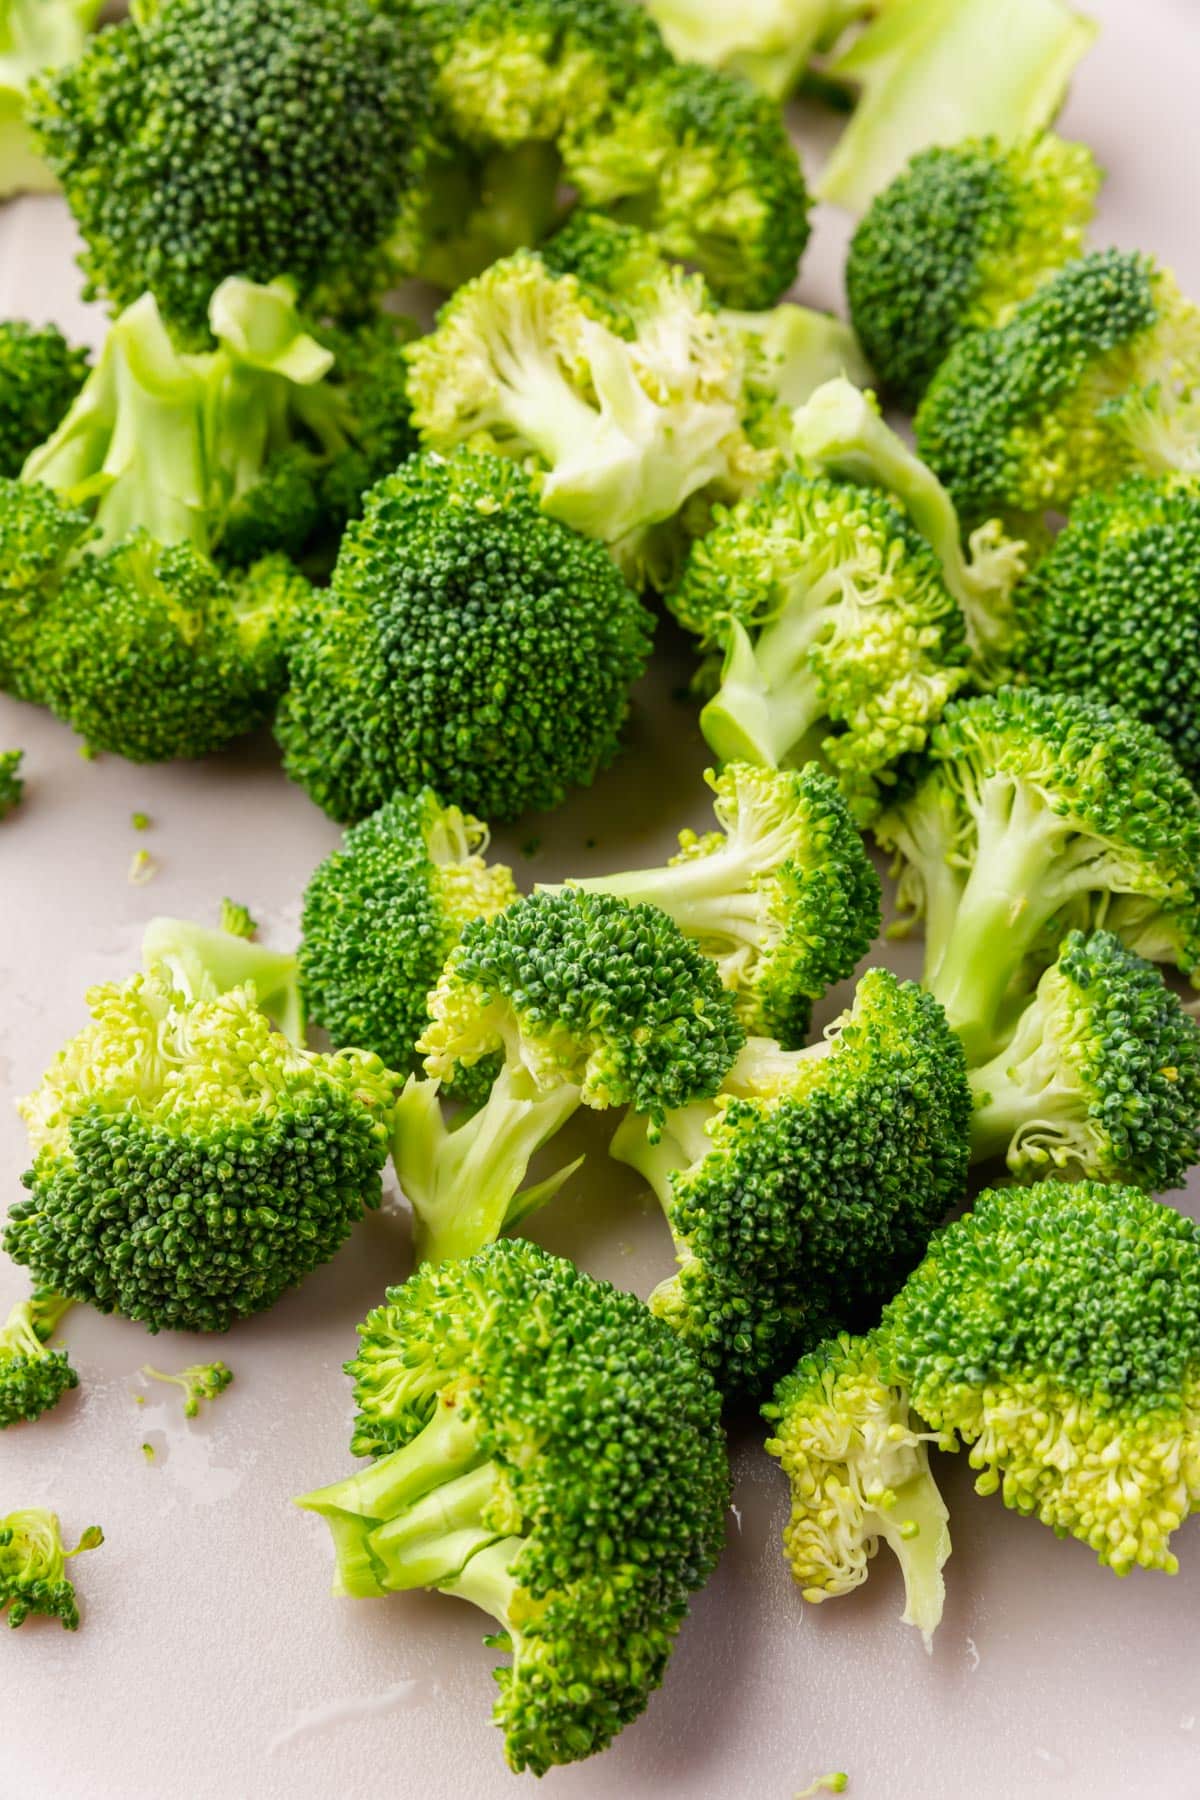 Broccoli florets that have been cut into smaller pieces on a cutting board.